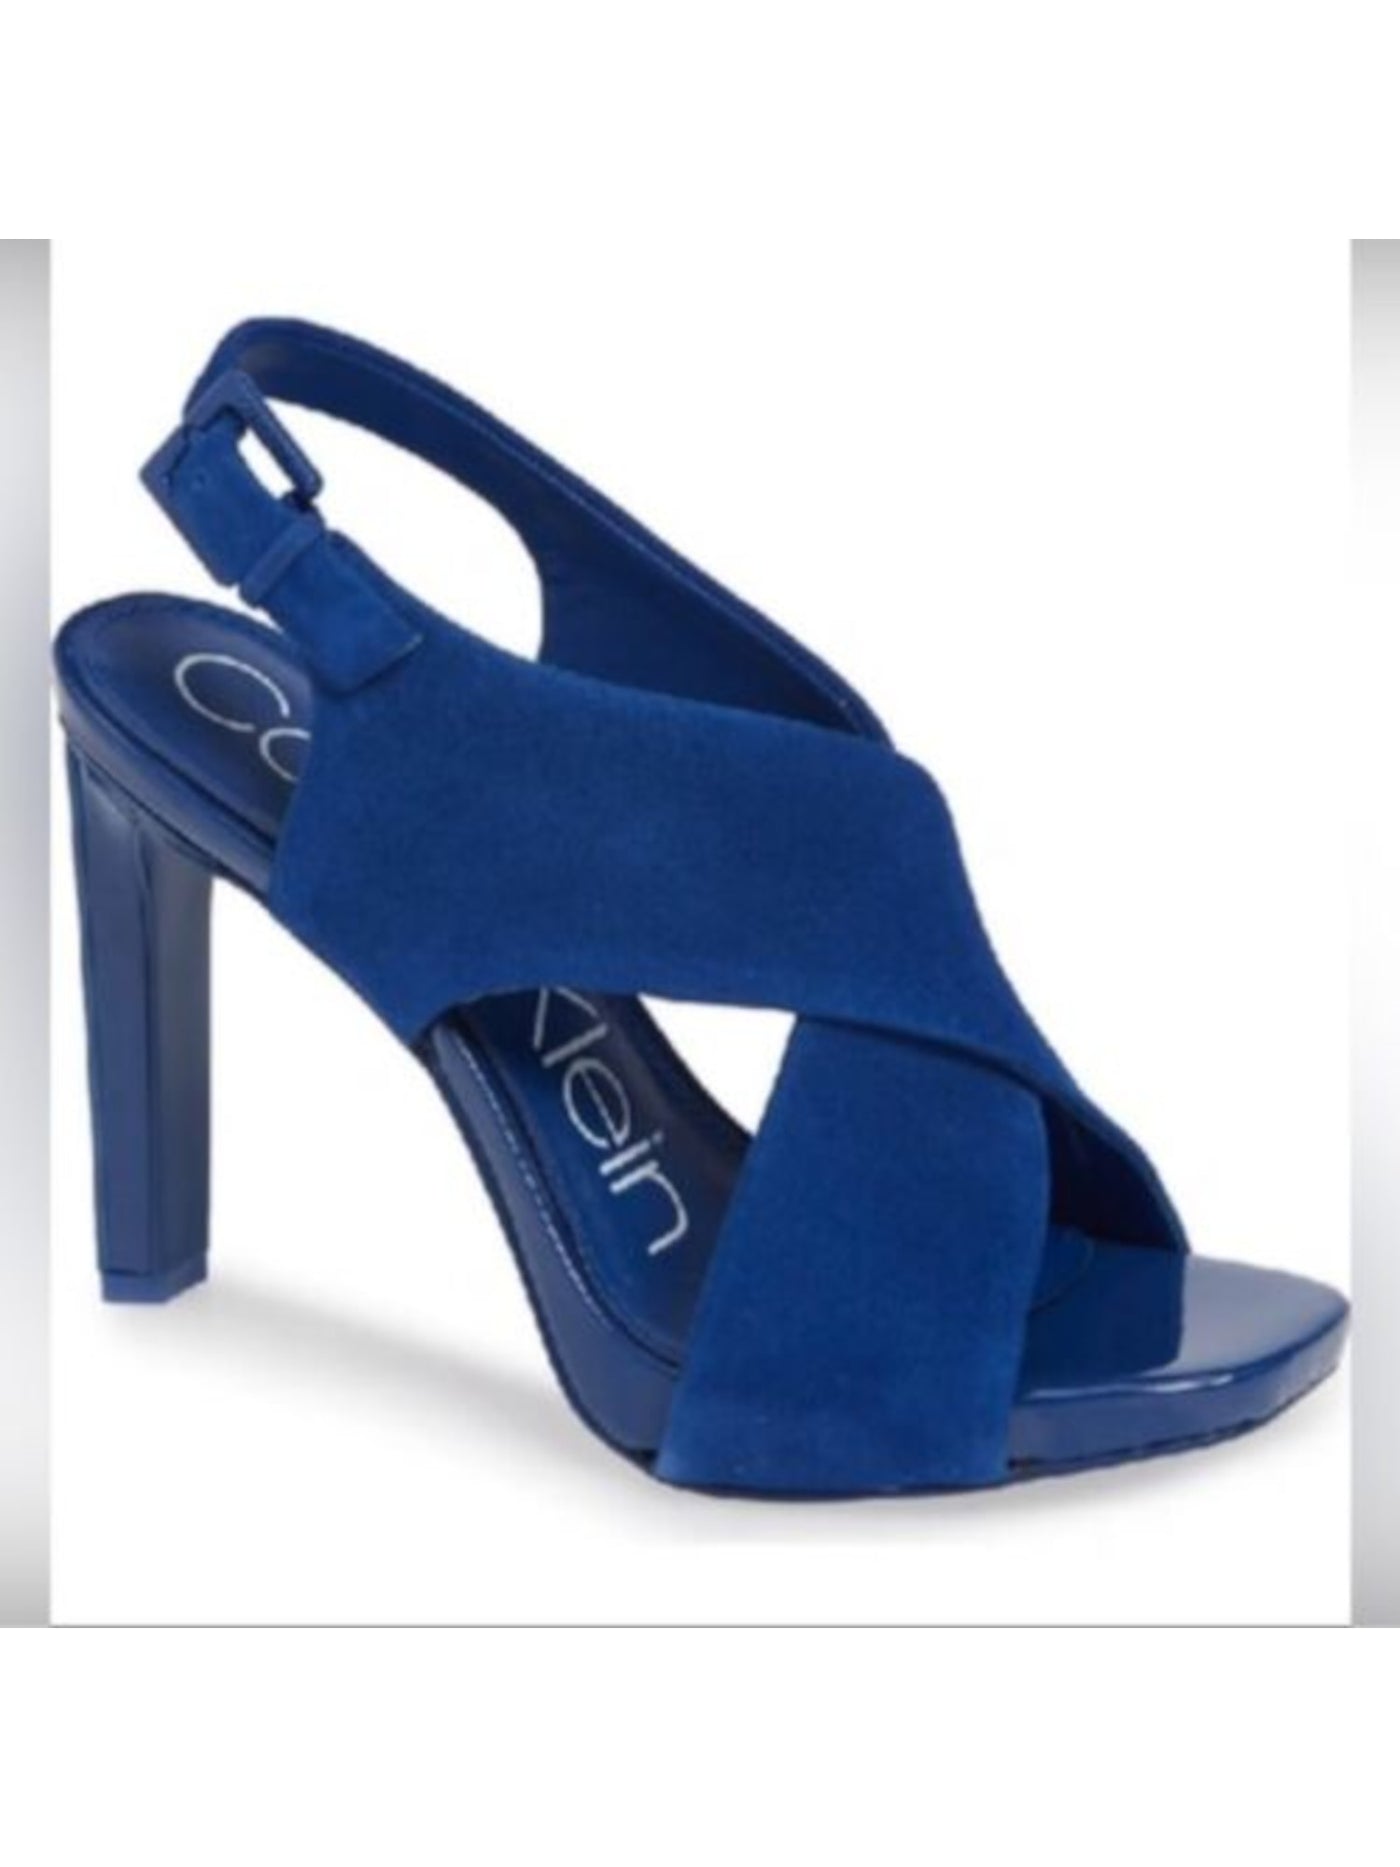 CALVIN KLEIN Womens Blue Padded Strappy Myra Square Toe Block Heel Buckle Leather Slingback 6.5